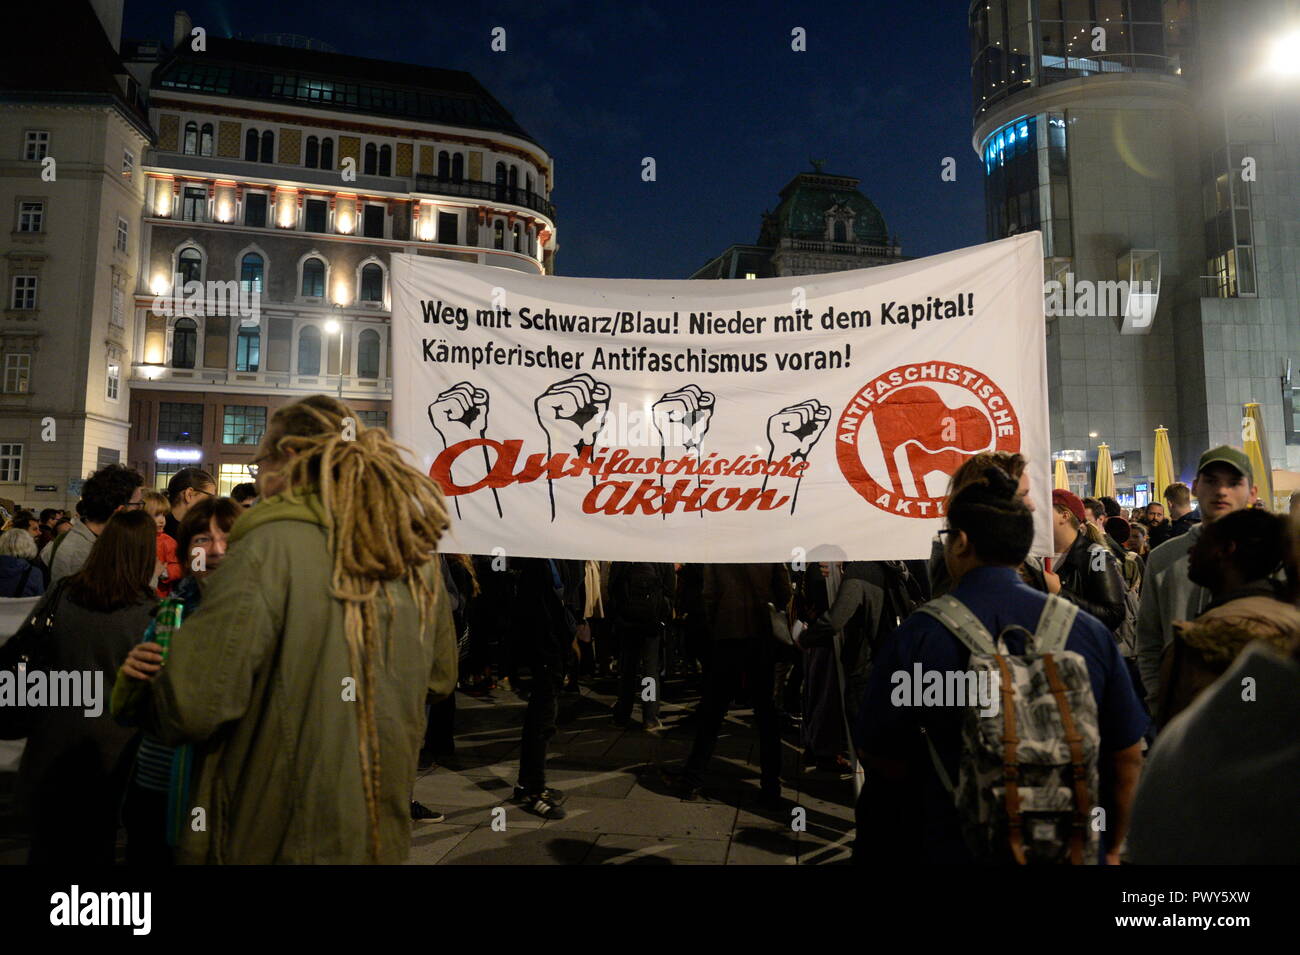 Vienna, Austria. 18 October 2018. The Thursday demonstrations against the current Federal Government are reactivated. The rally was called on Stephansplatz. The protests will then be continued every week at various locations in Vienna. Credit: Franz Perc / Alamy Live News Stock Photo